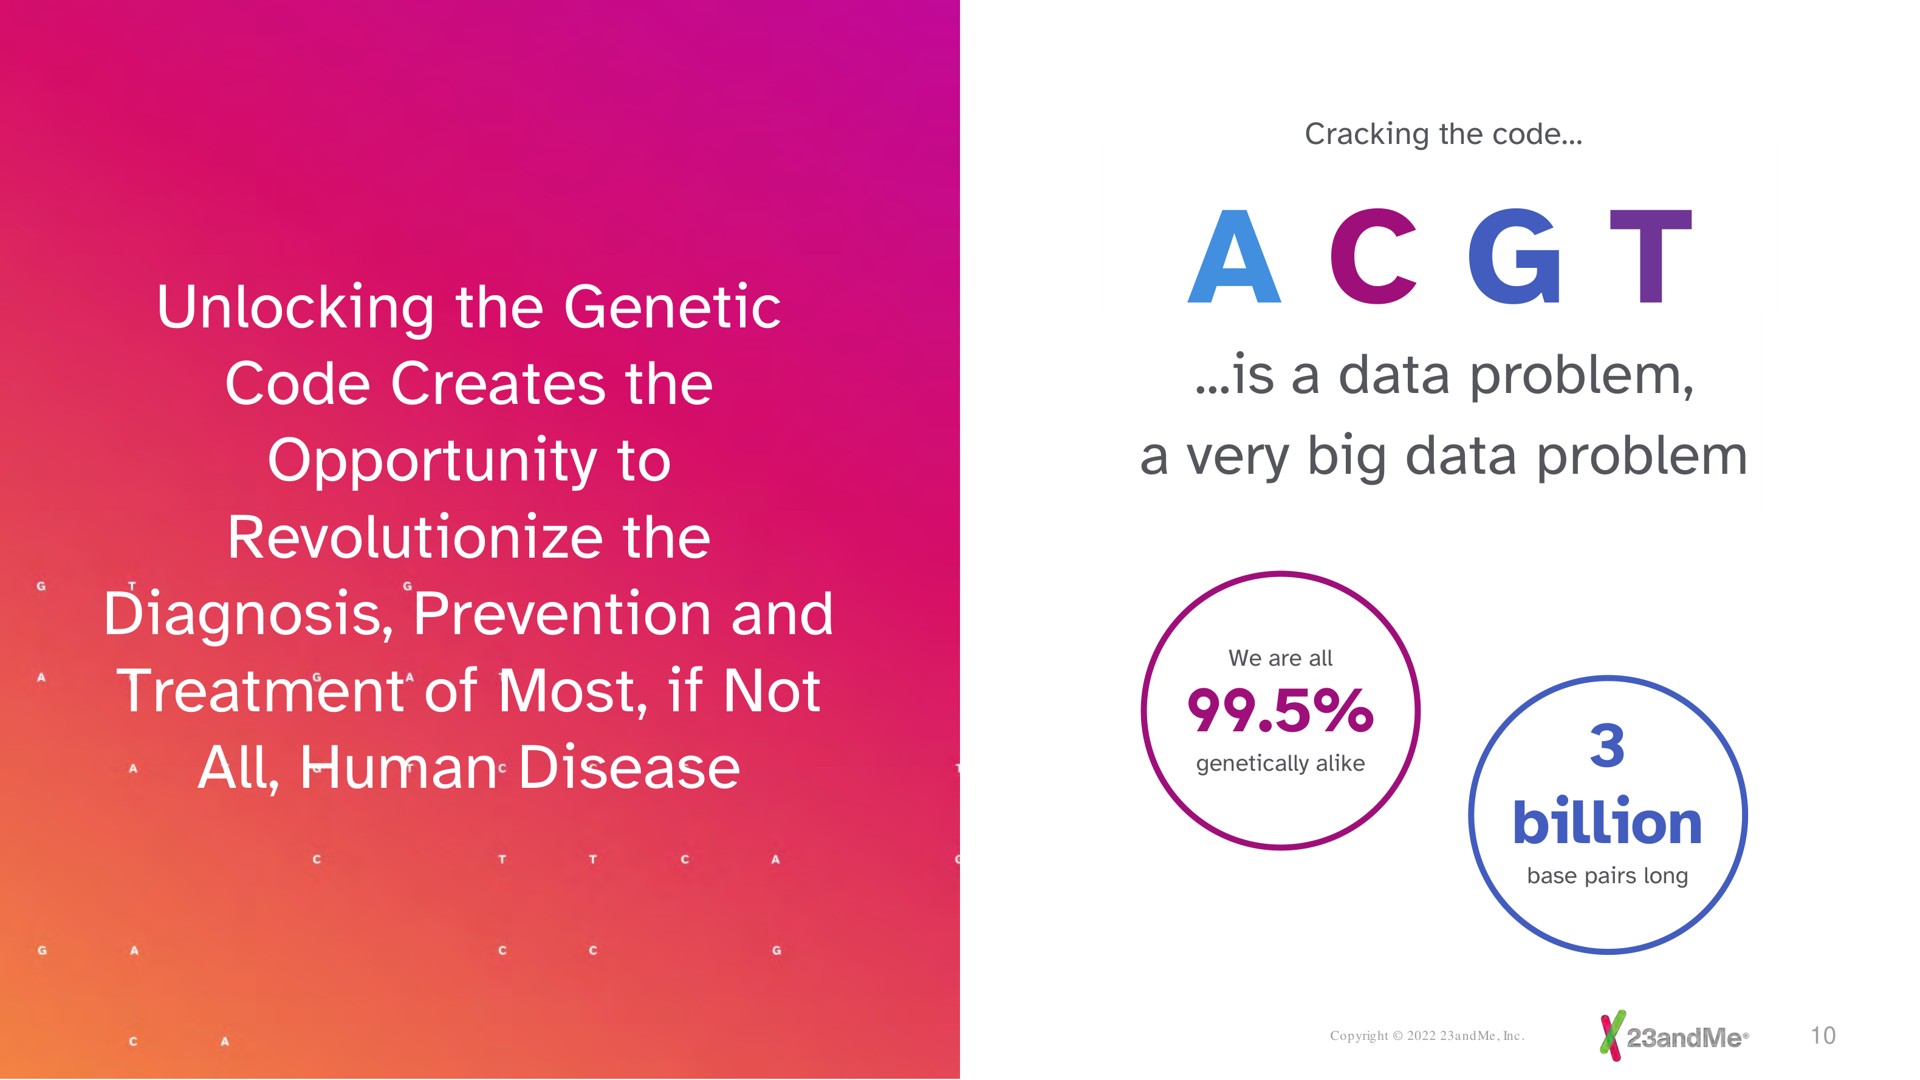 unlocking the genetic code creates the opportunity to revolutionize the diagnosis prevention and treatment of most if not all human disease a is a data problem a very big data problem billion | 23andMe